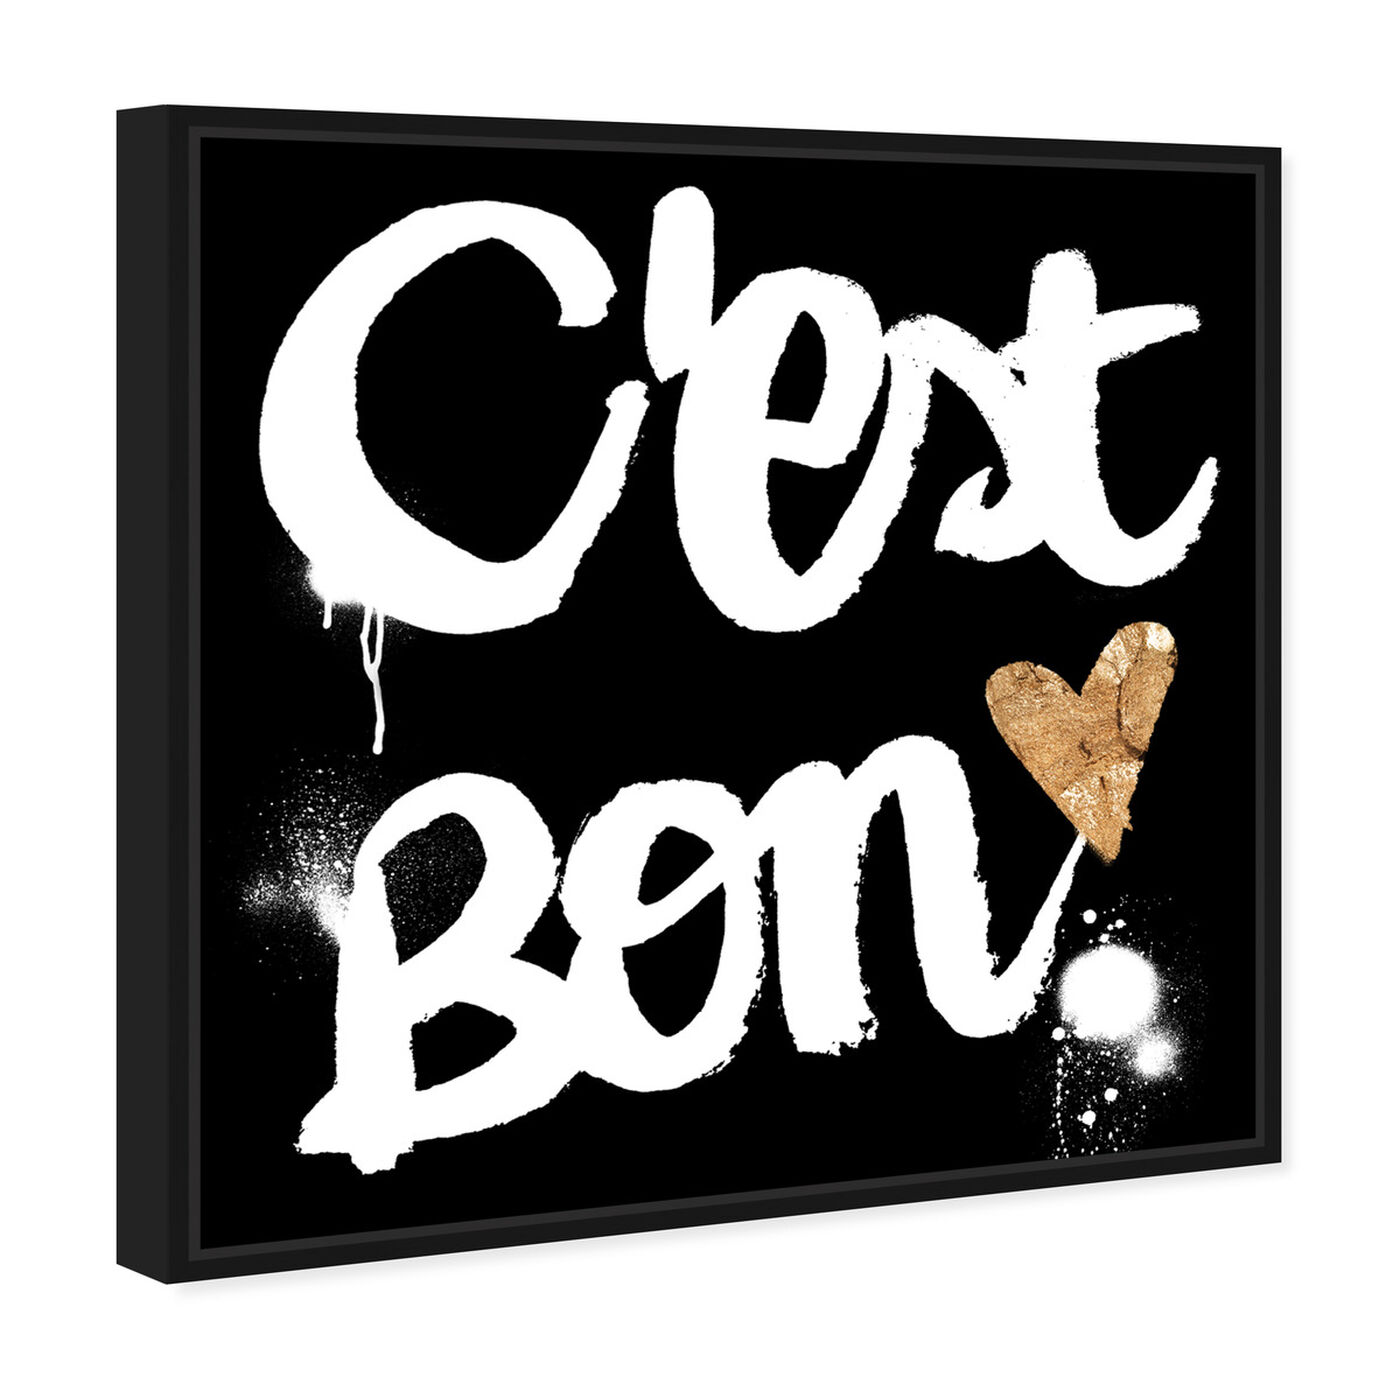 Angled view of C Est Bon featuring typography and quotes and motivational quotes and sayings art.